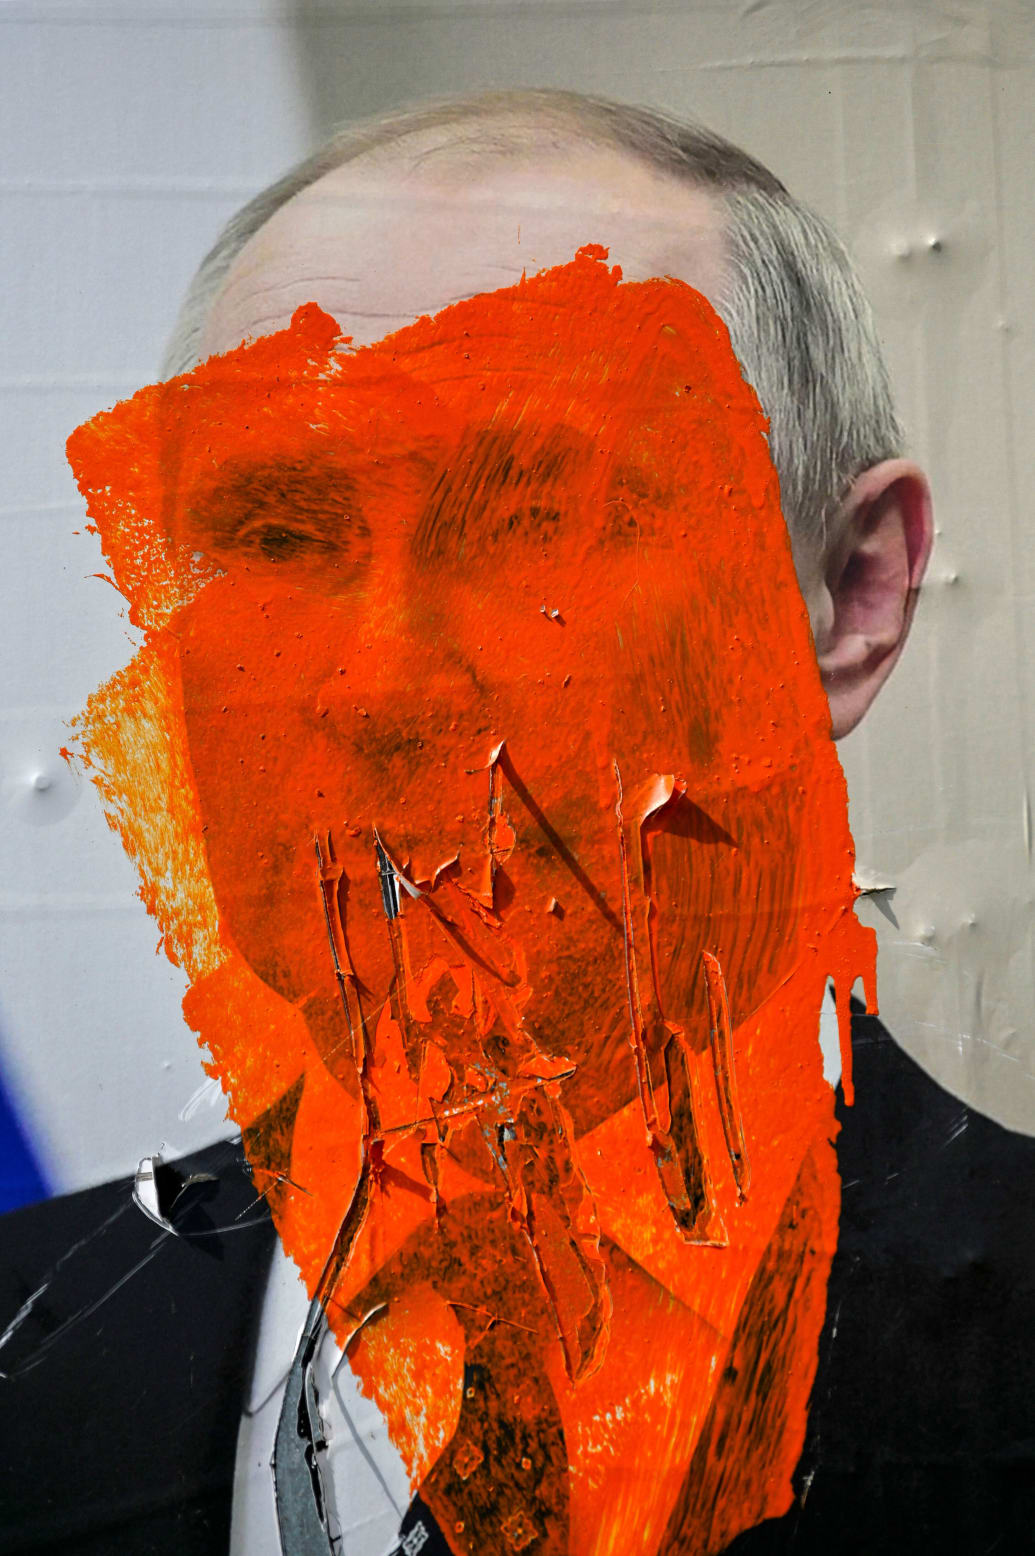 A picture of Vladimir Putin that’s been painted over and ripped up.